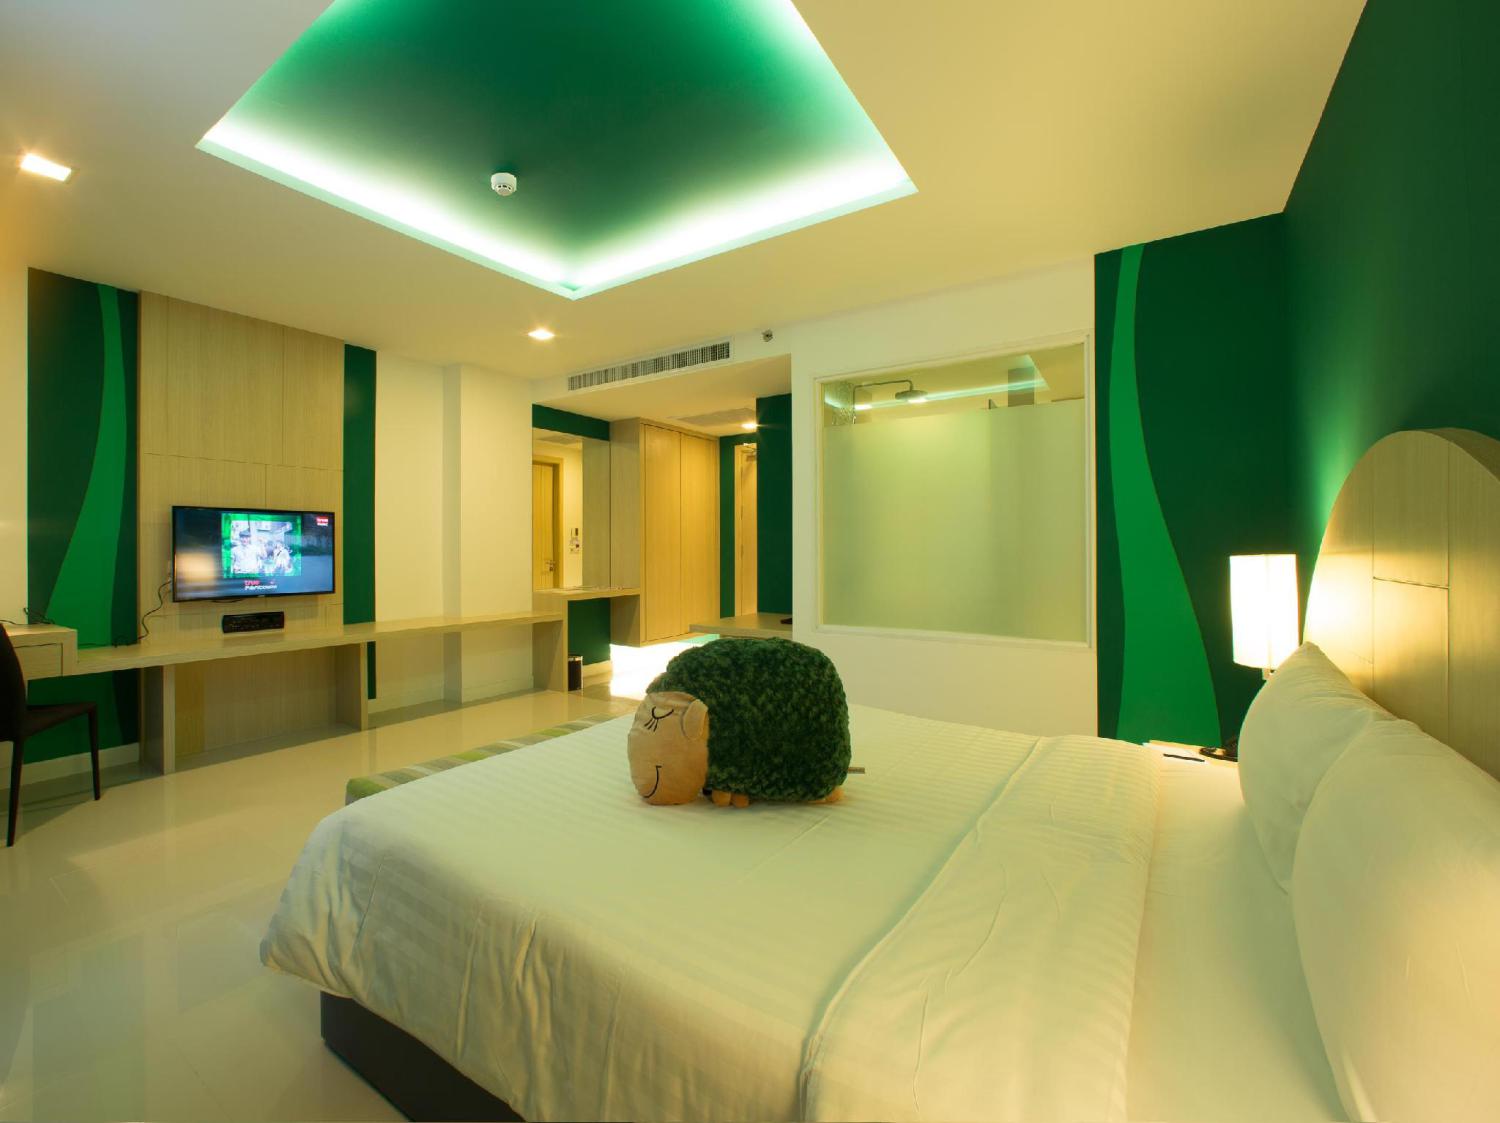 SLEEP WITH ME HOTEL design hotel @ patong - Image 4